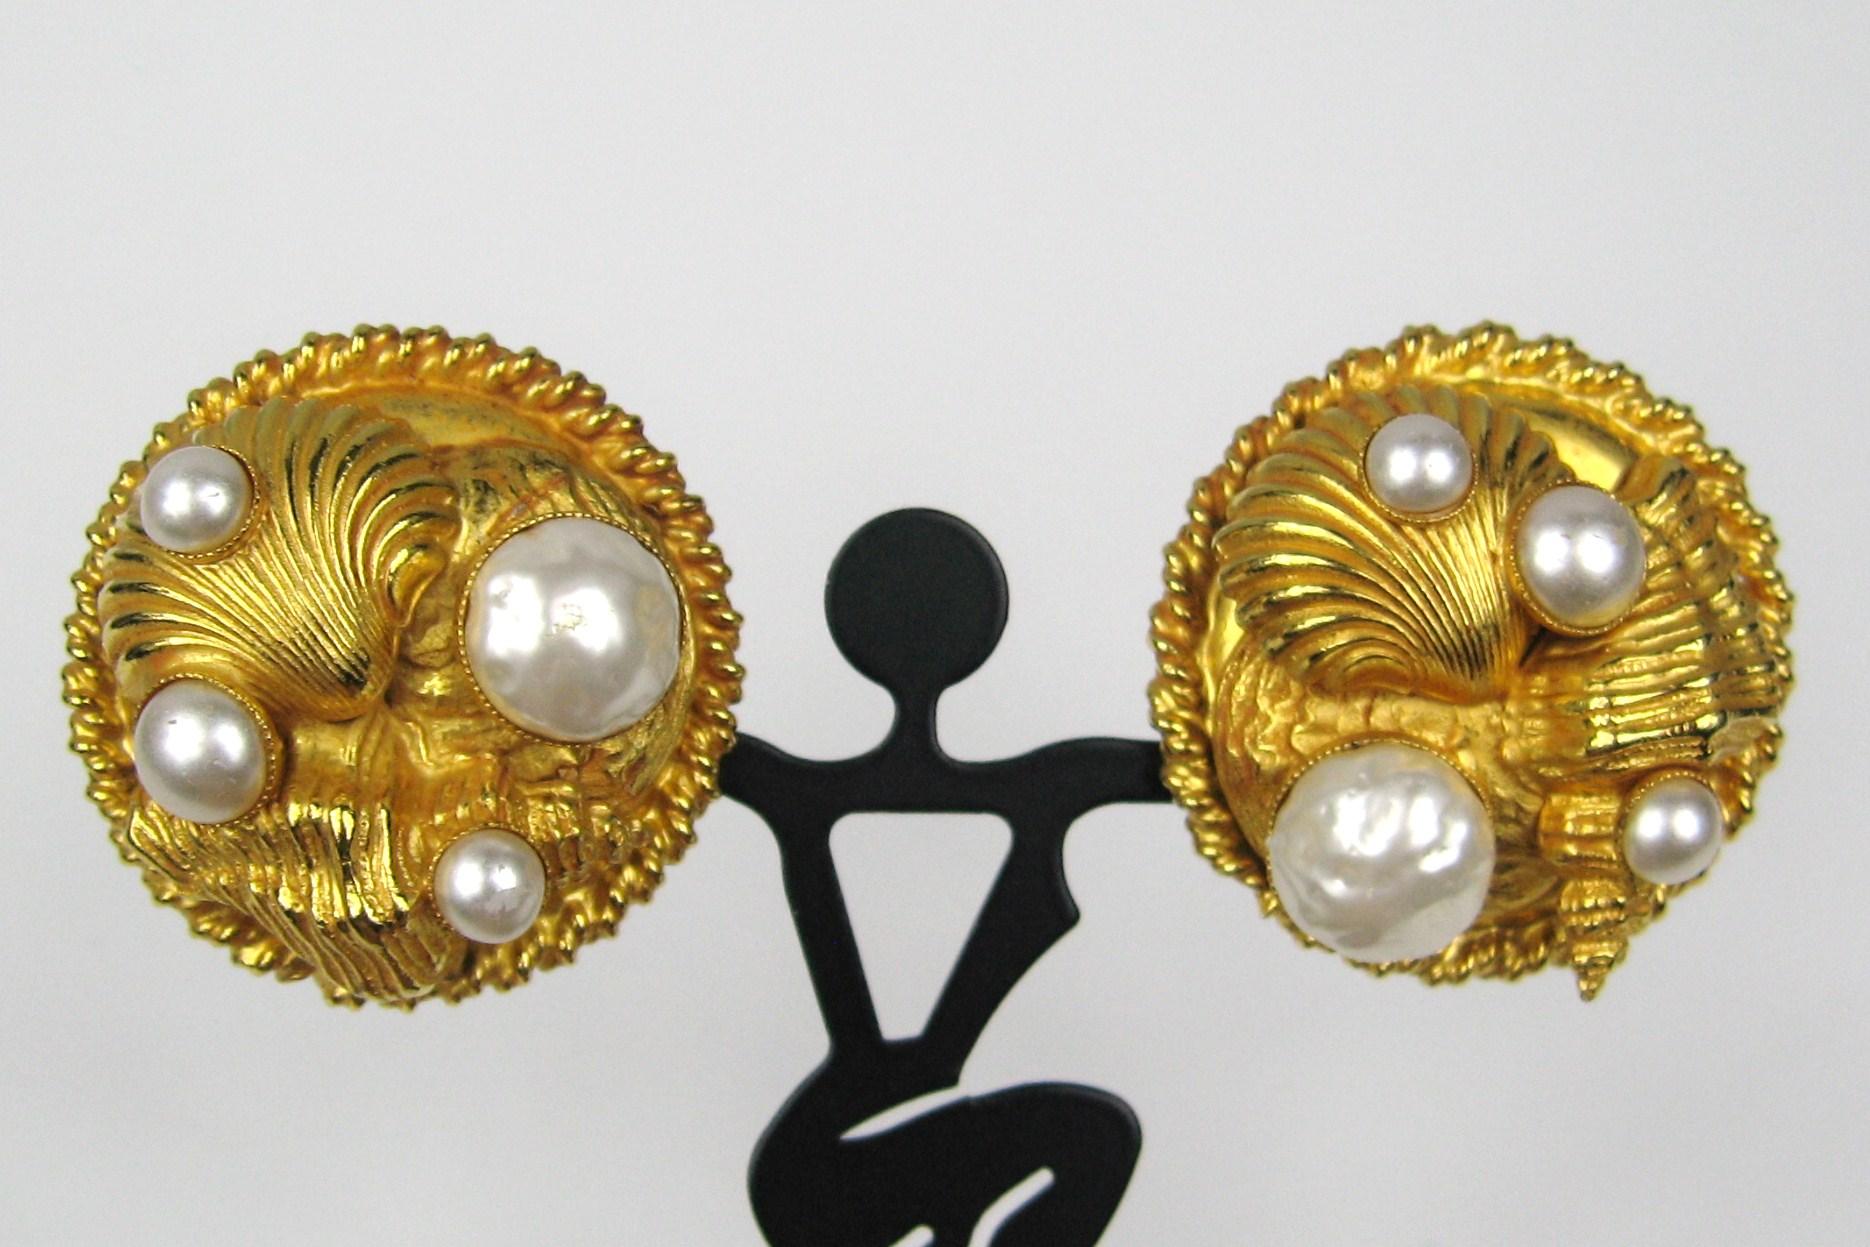 Created by famed Parisian designer Dominique Aurientis Gold Gilt Sea Shell Earring with pearls insets, what a dynamic design Measuring 1.5 in diameter 
This French jewelry designer has a vast international customer base and is known throughout the